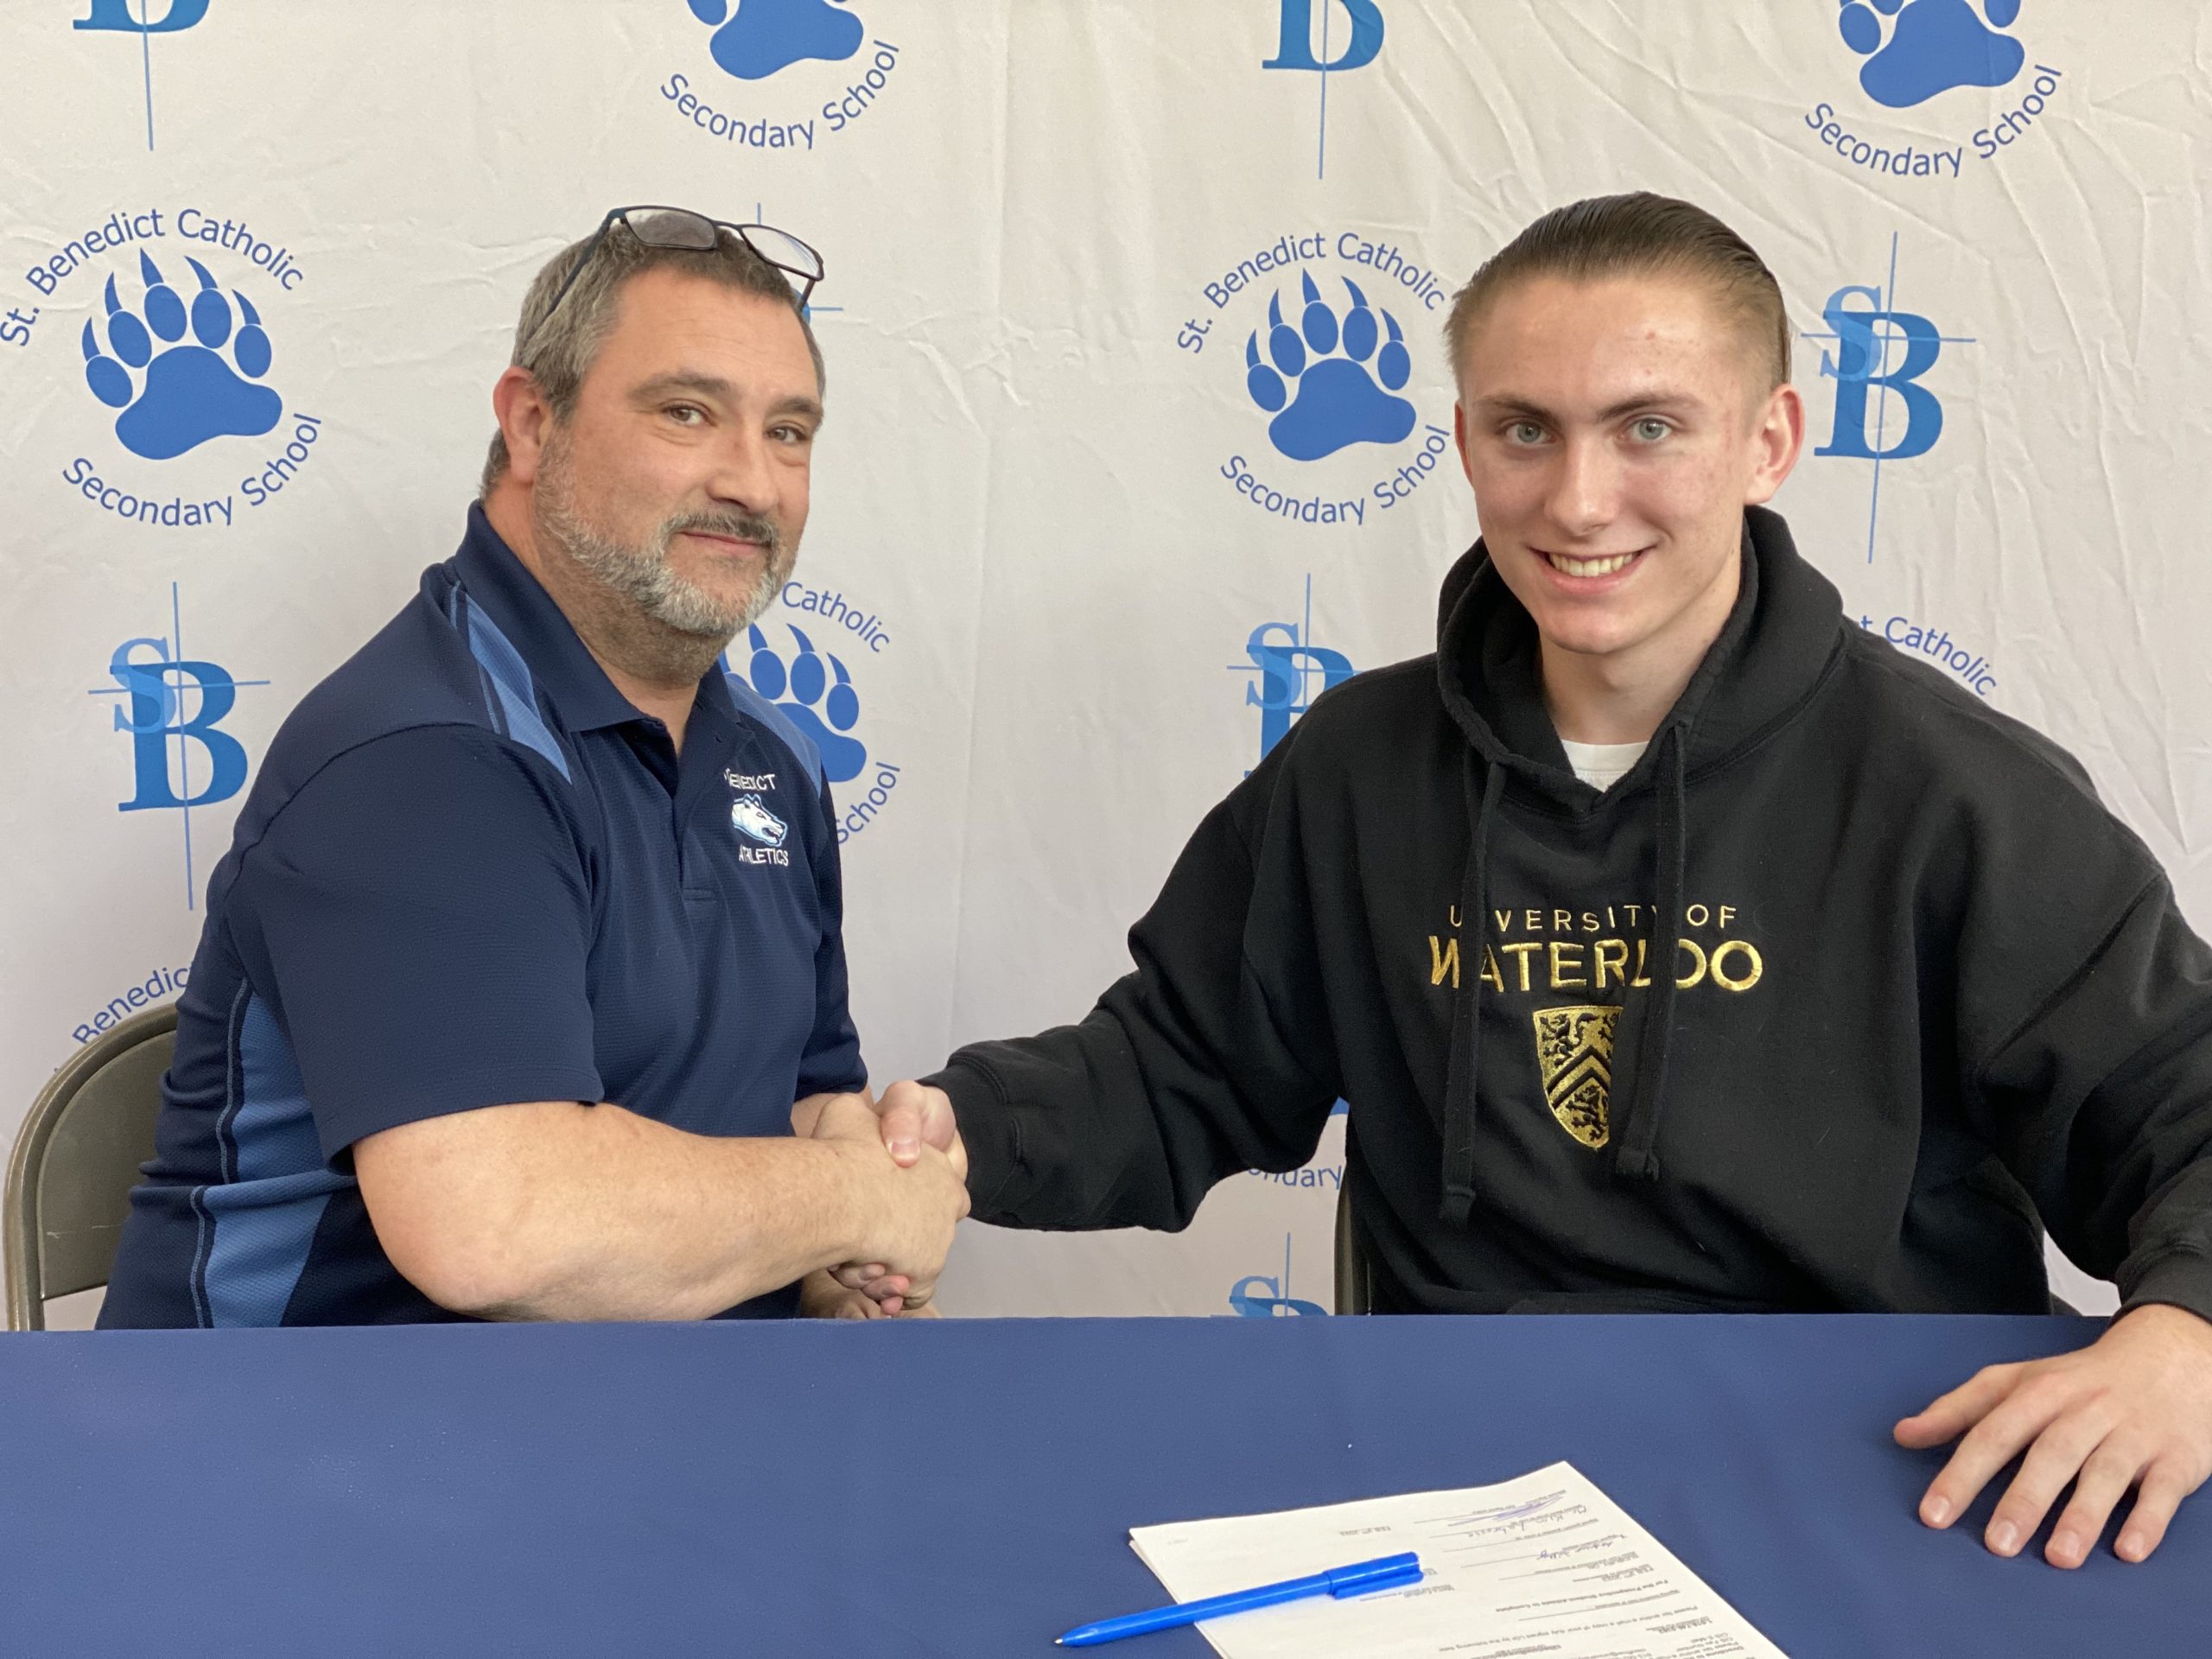 St. Benedict Student, Andrew Kilby, Signs Commitment Letter with University of Waterloo